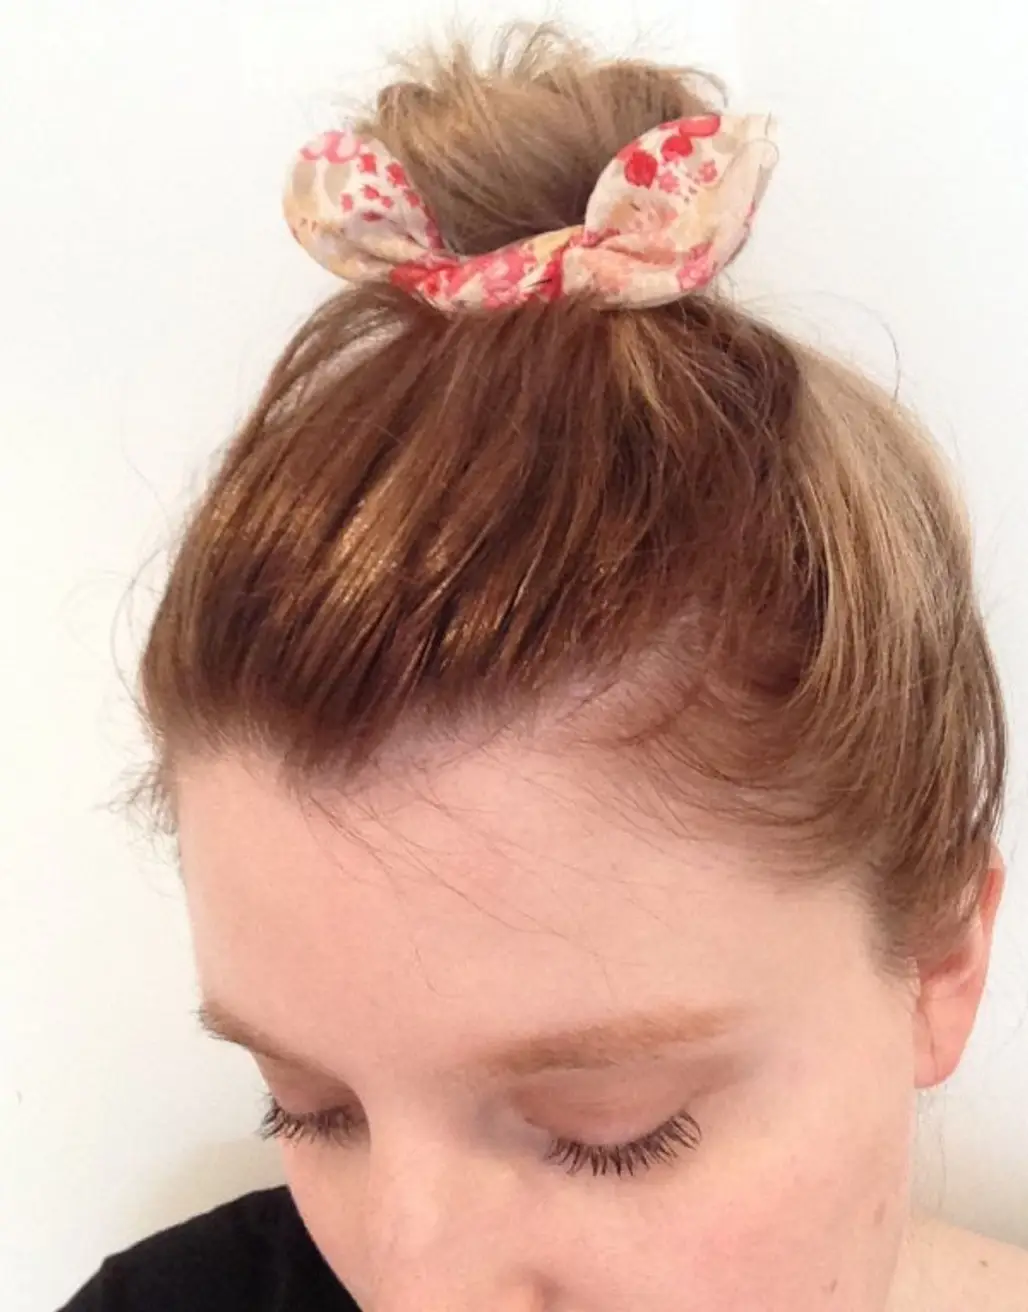 Use a Fabric Hair Tie to Avoid Kinks and Creases when You Pull Your Hair up to Work out